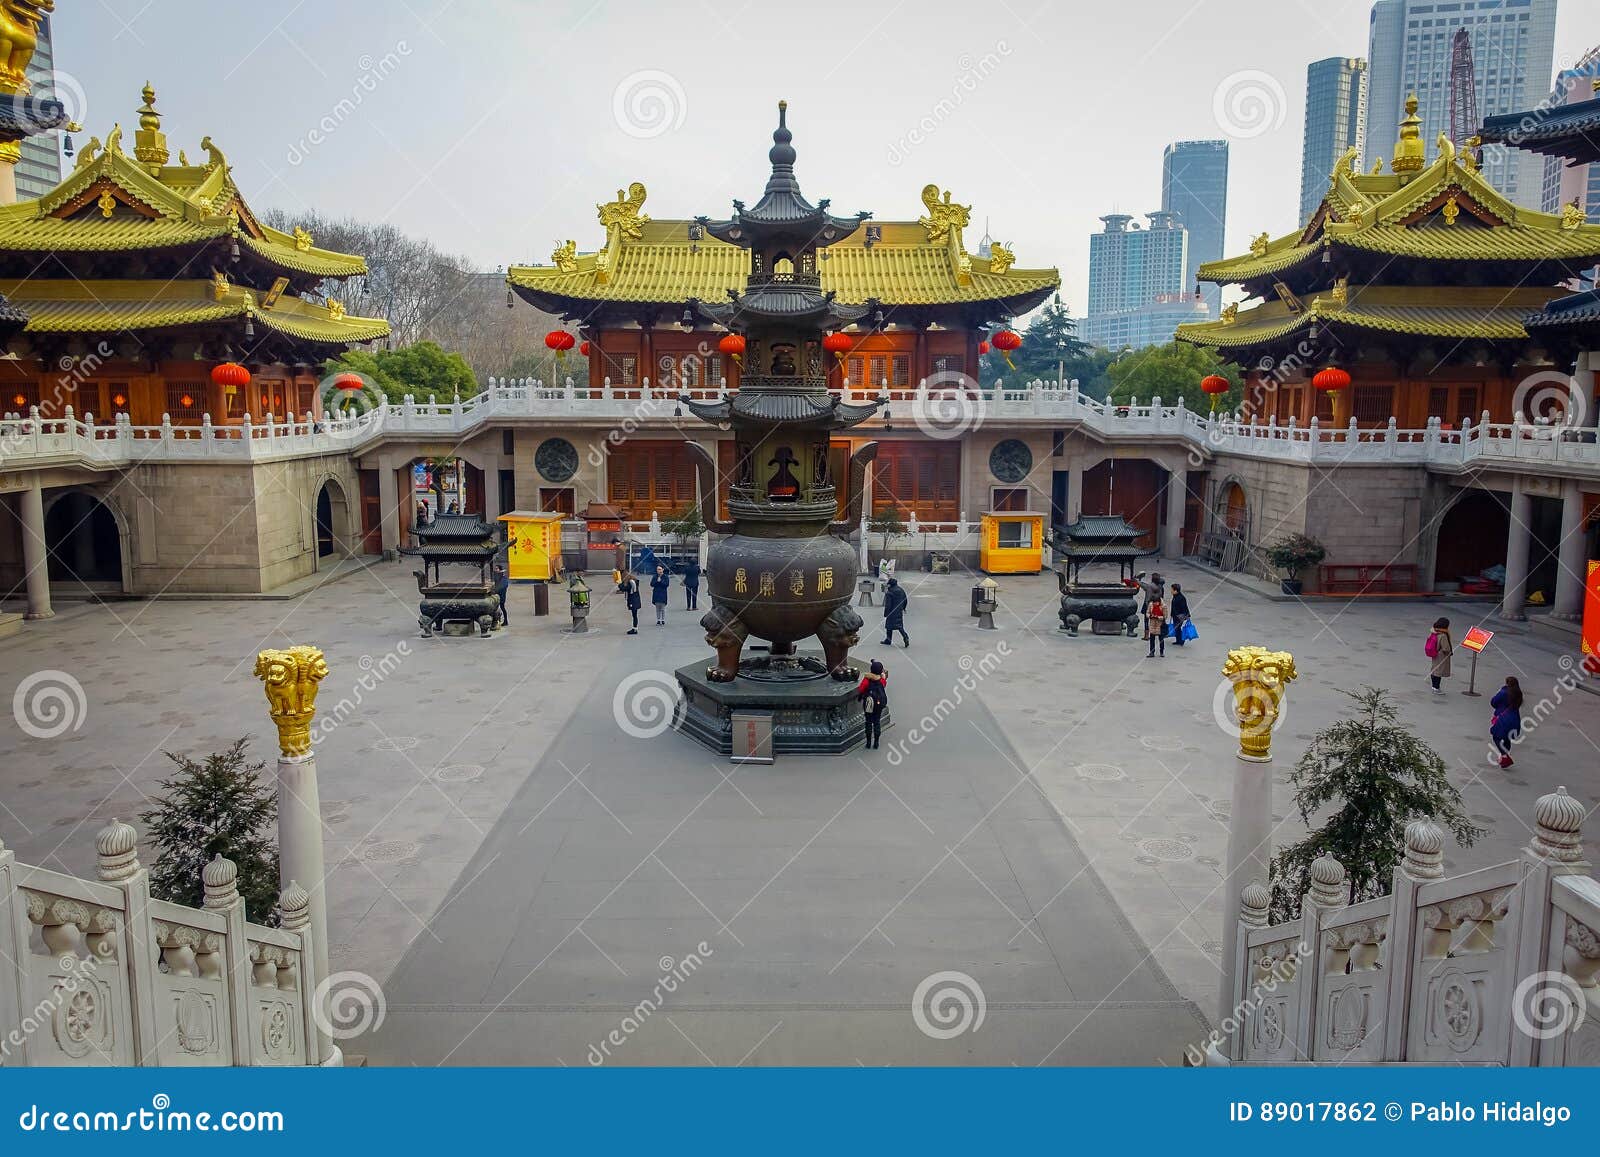 Shanghai China Beautiful Temple Building With Golden Roof Sorrounding Ancient Plaza With Very Nice Statue Centered Editorial Photography Image Of Bicycles Facade